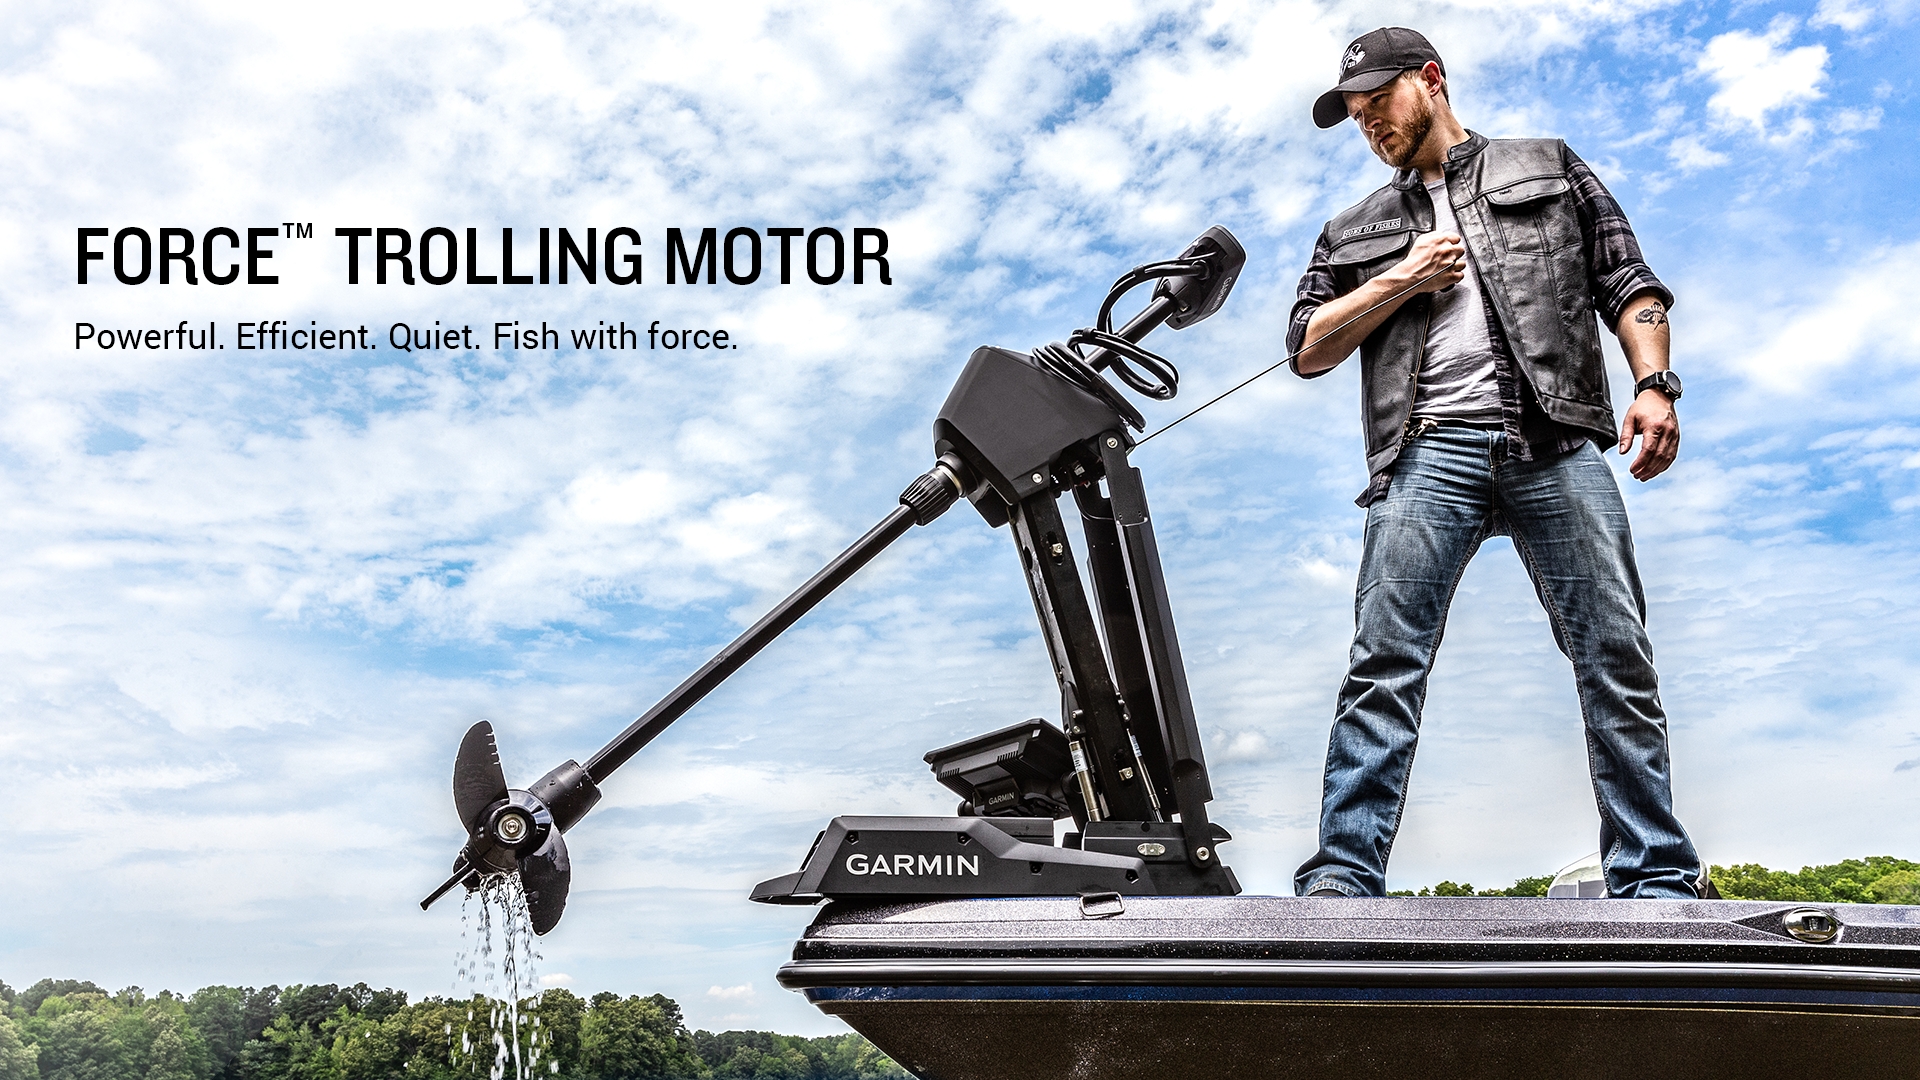 Garmin® enters the freshwater trolling motor market with Force